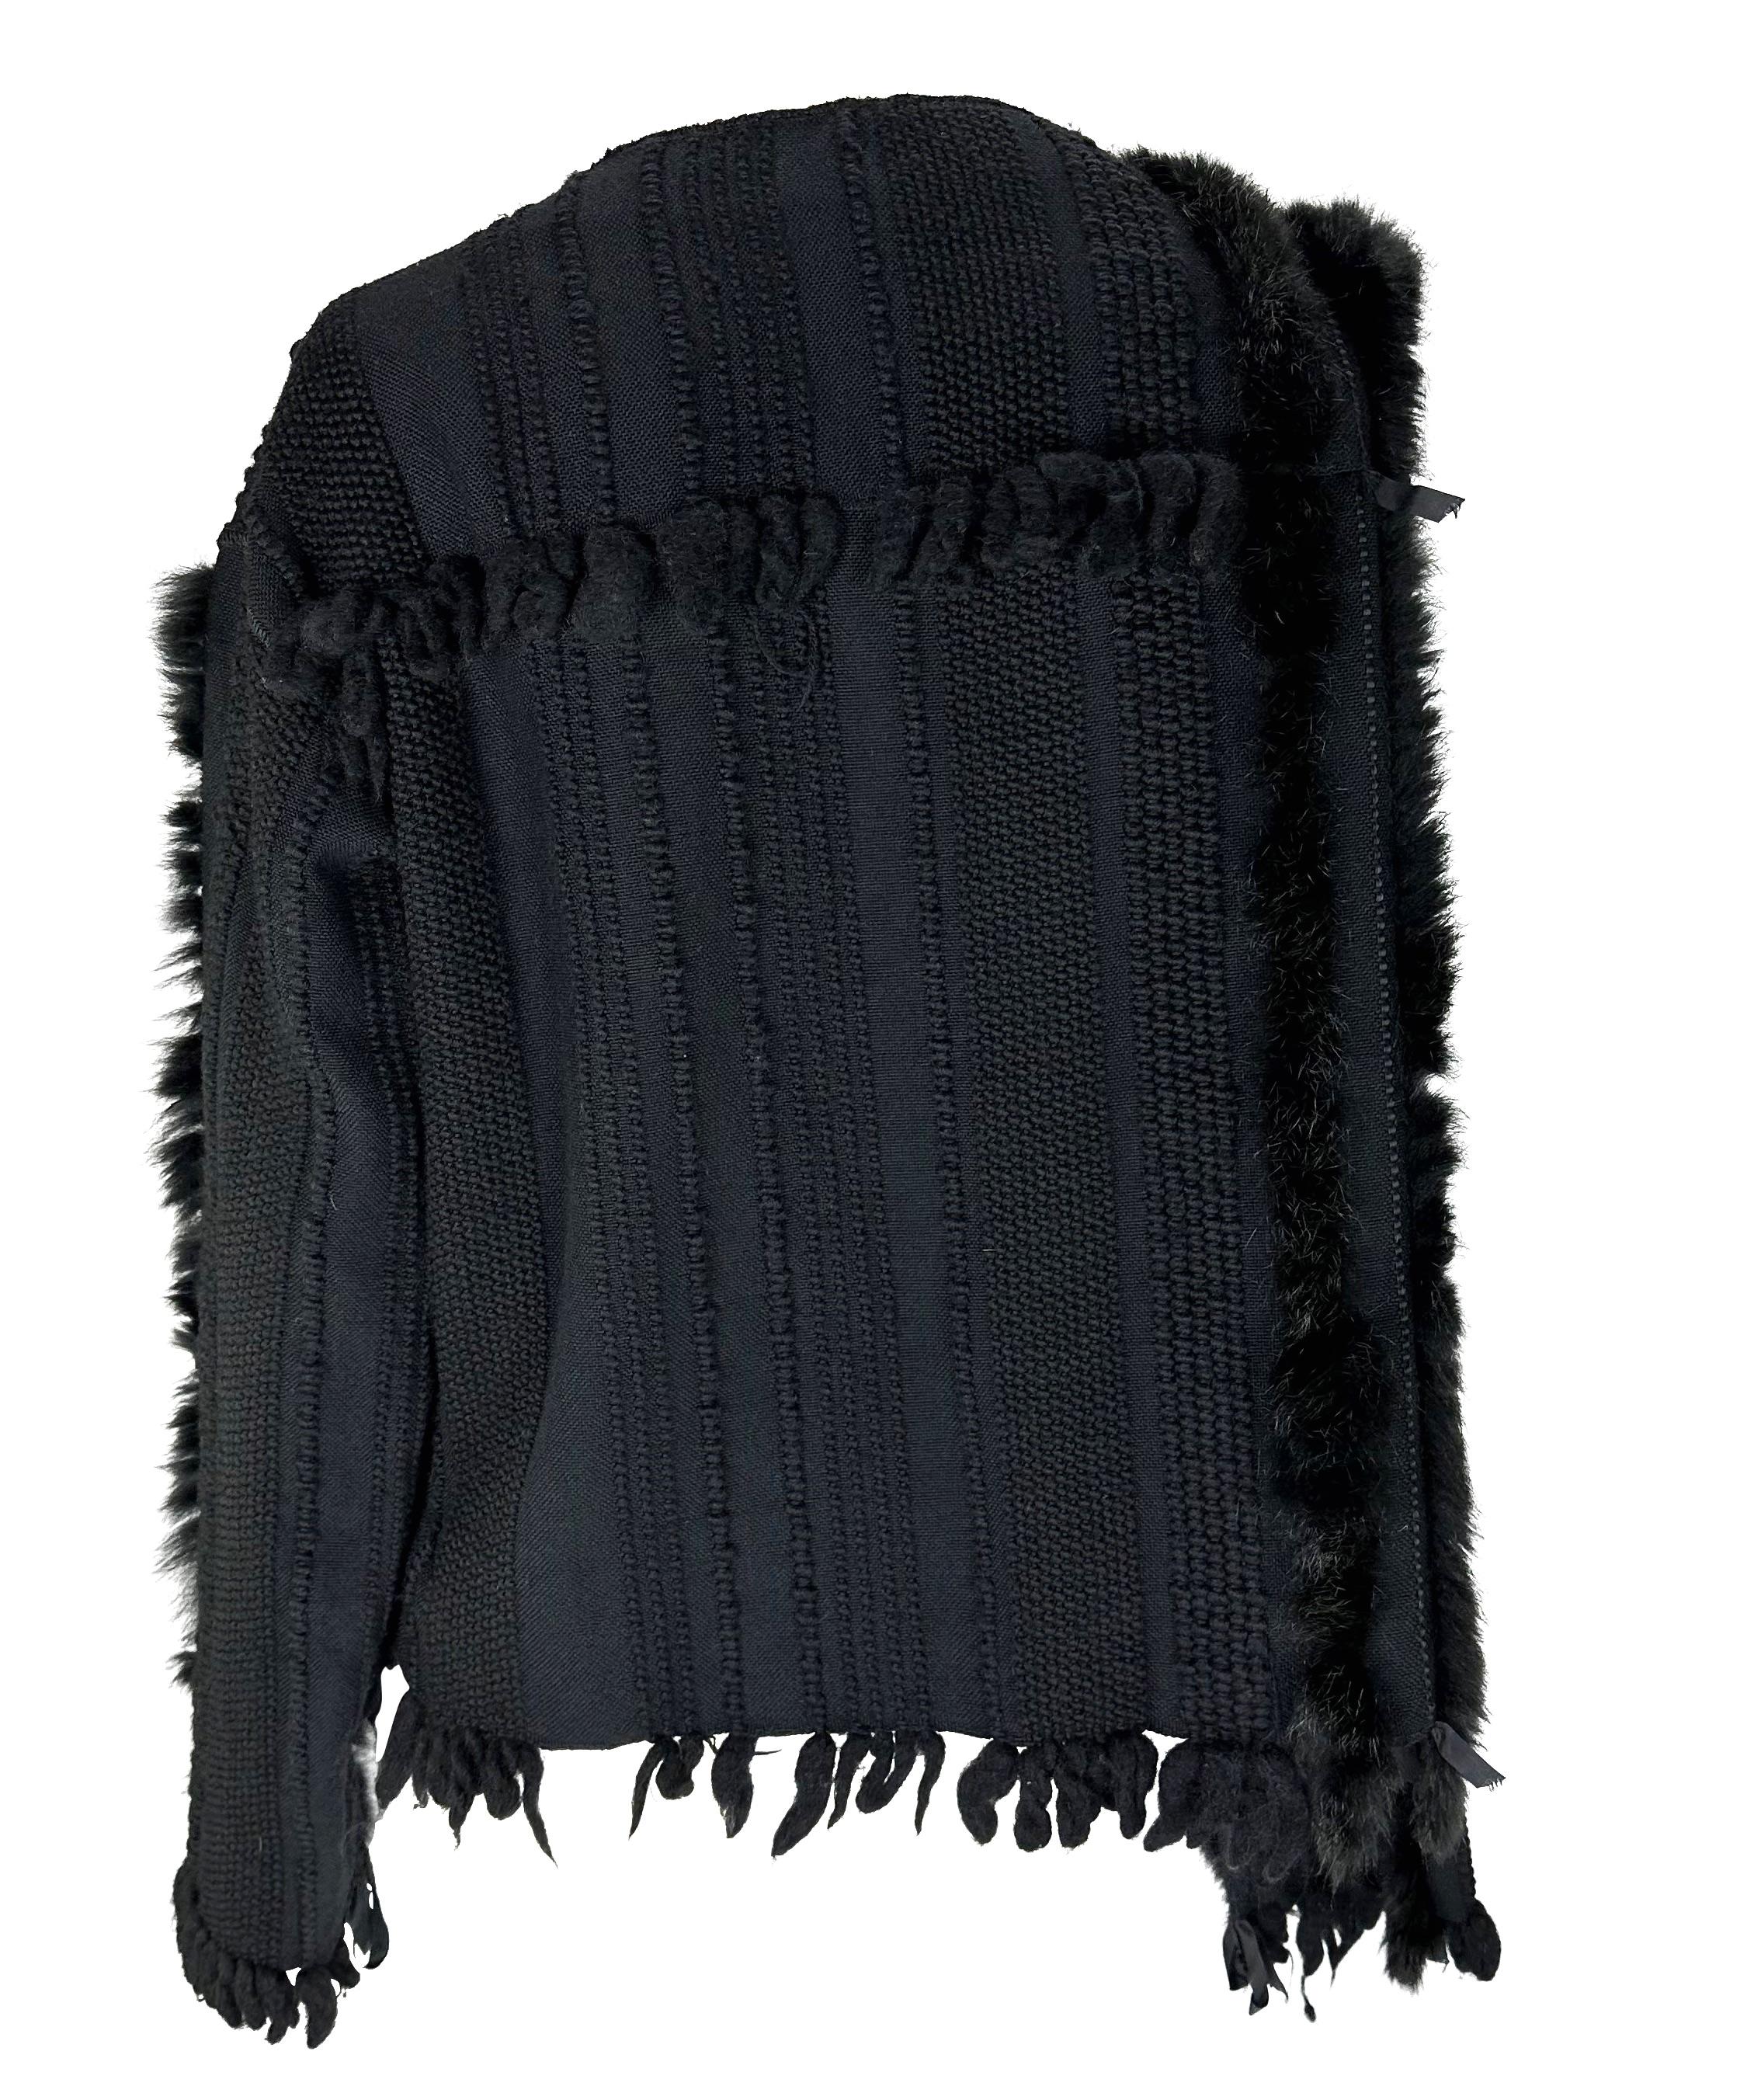 F/W 2002 Gucci by Tom Ford Black Fur Trimmed Knit Lace-Up Oversized Sweater Top en vente 3